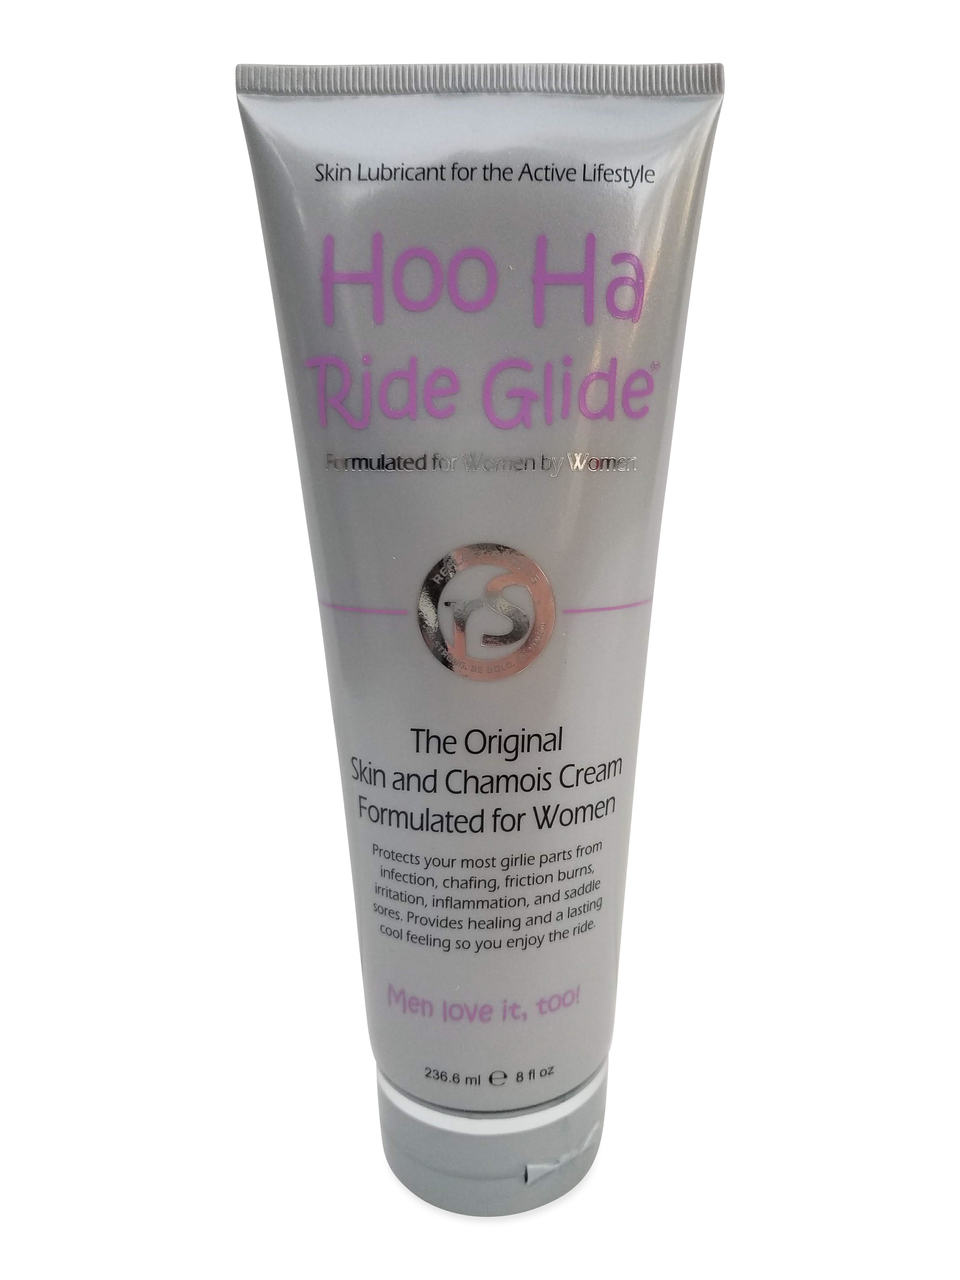 Hoo Ha Ride Glide-Skin and Chamois Butter Cream for women Questions & Answers